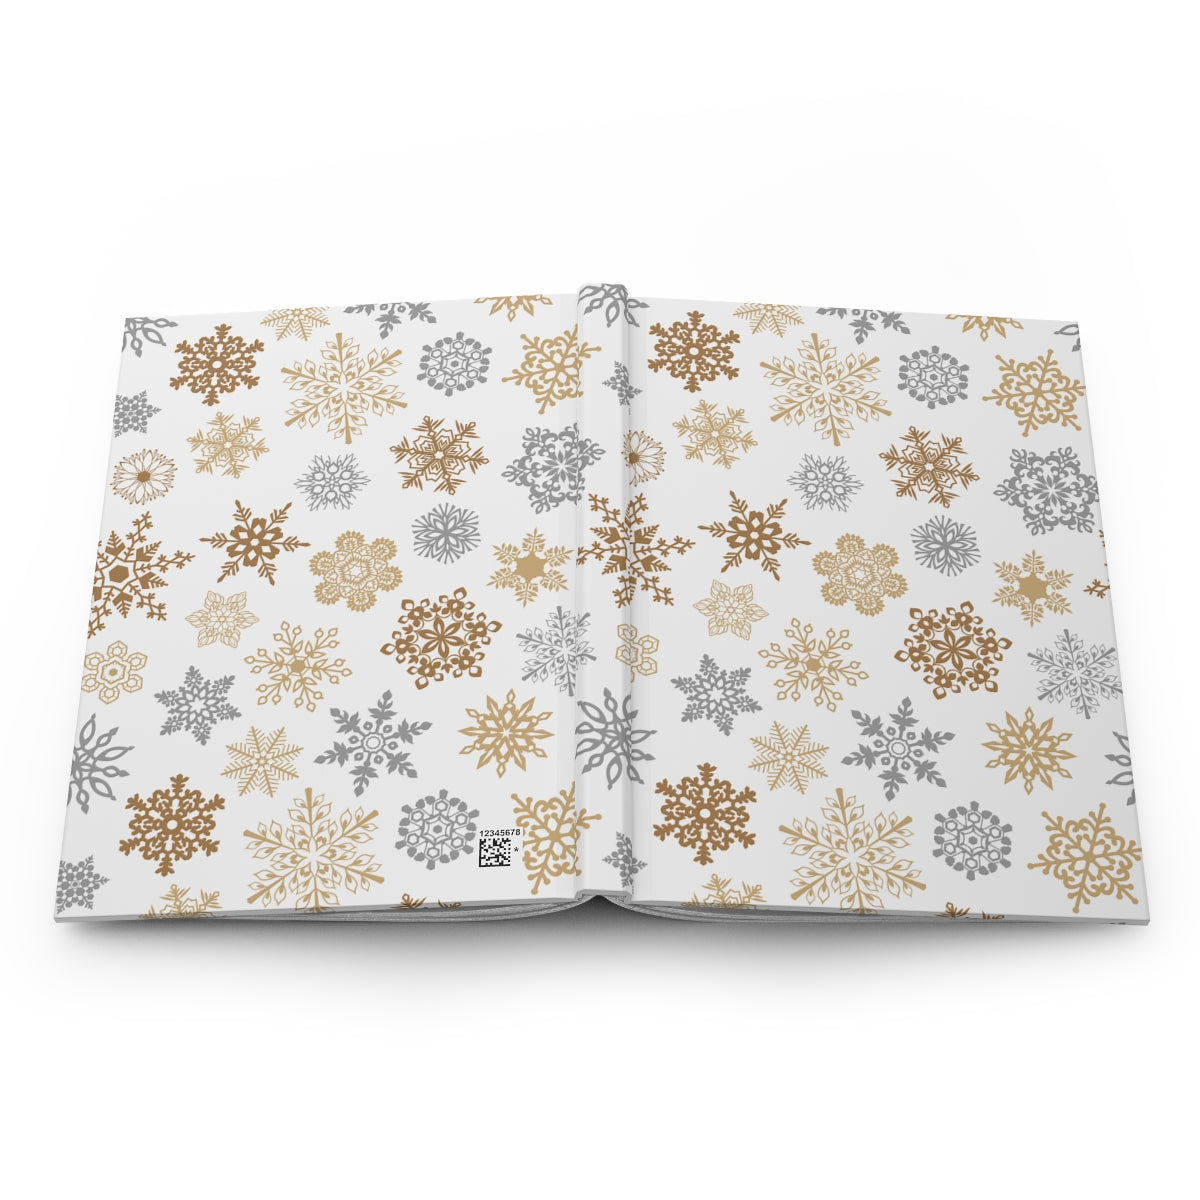 Gold and Silver Snowflakes Hardcover Journal Matte